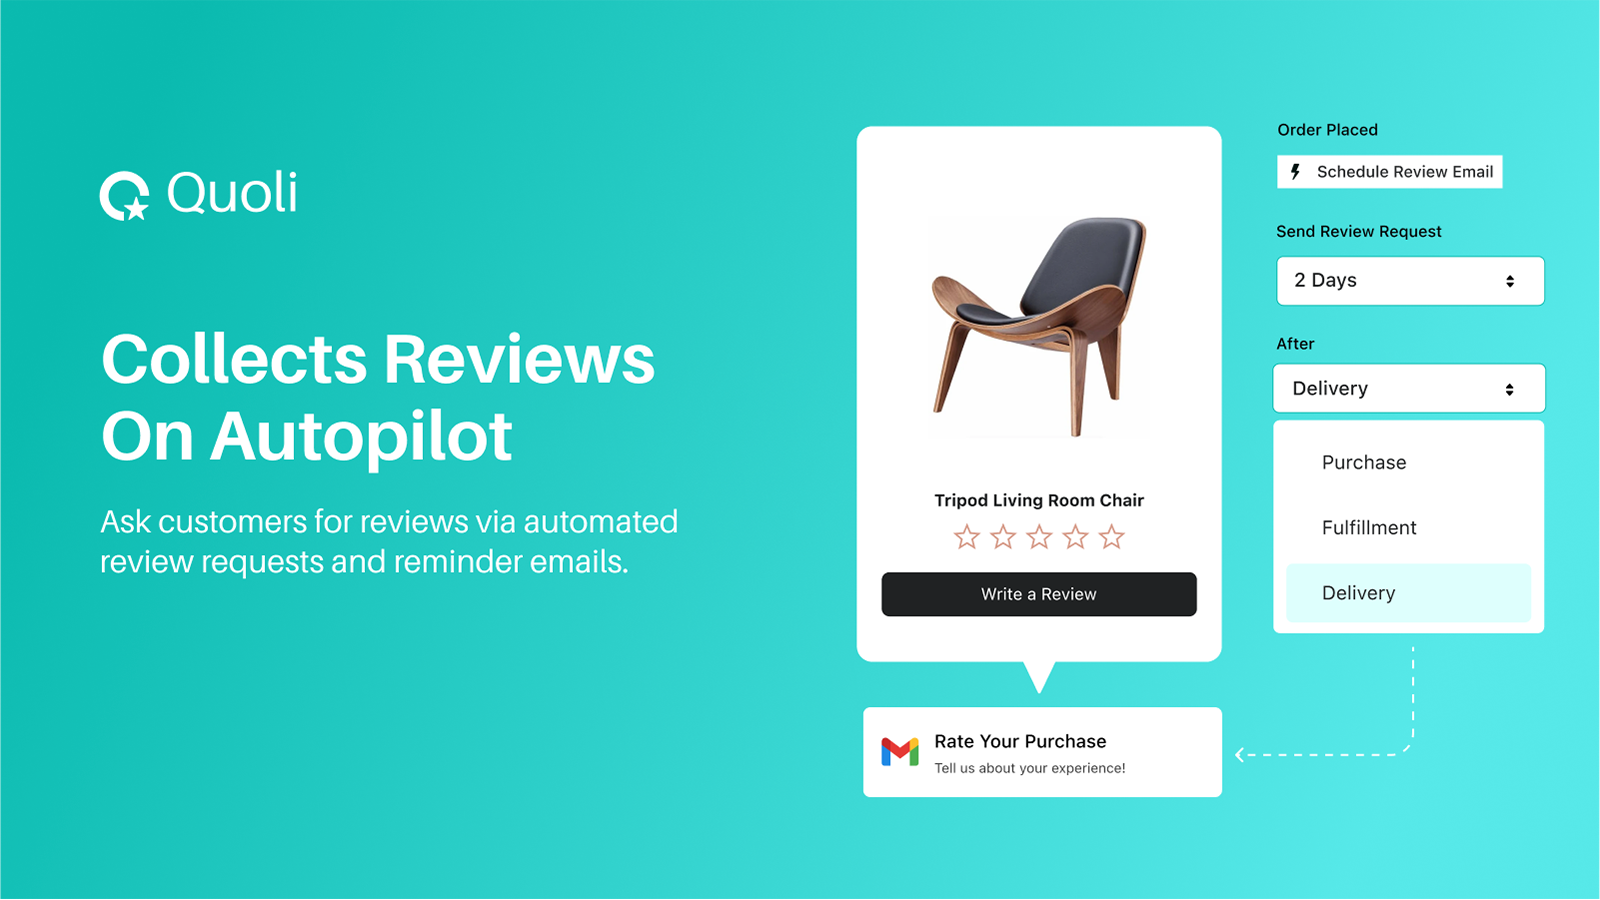 Automated review requests and reminder